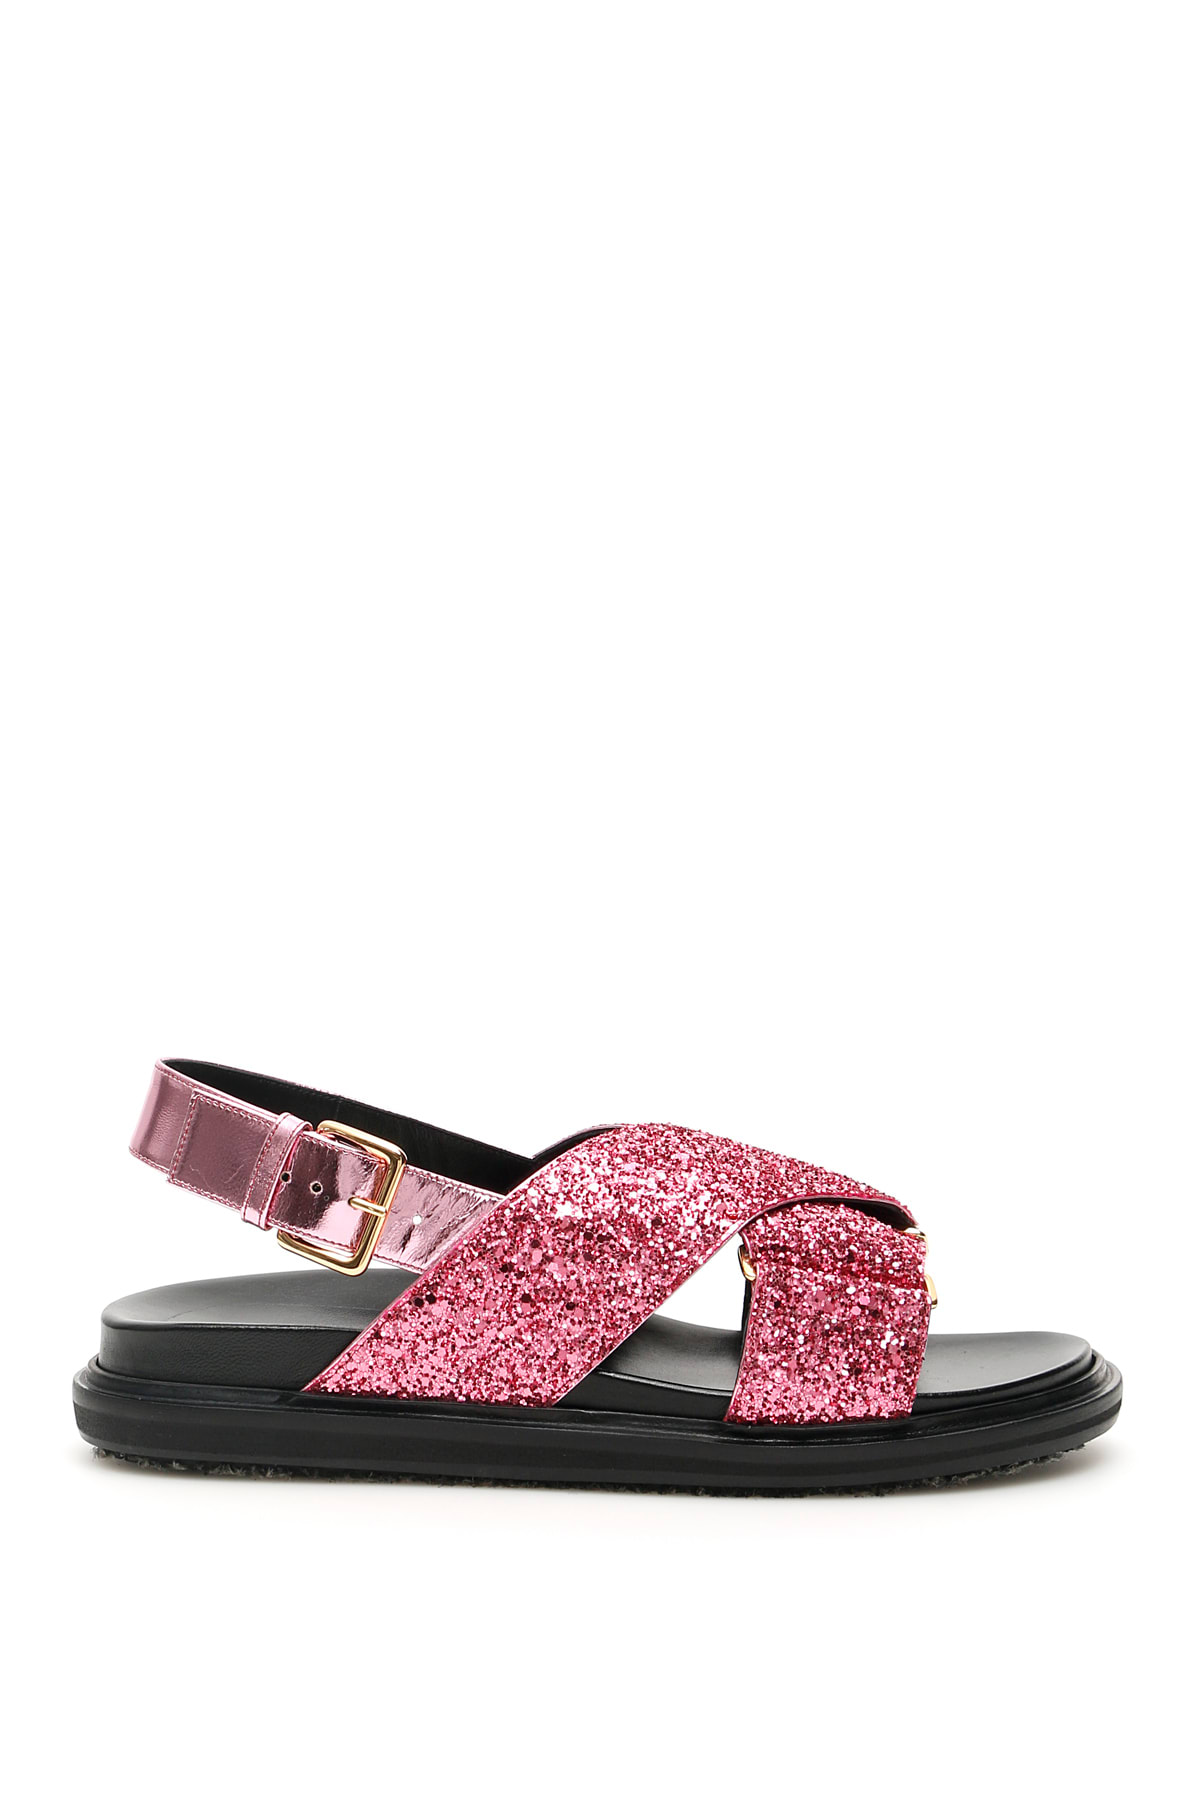 Buy Marni Fussbett Glitter Sandals online, shop Marni shoes with free shipping